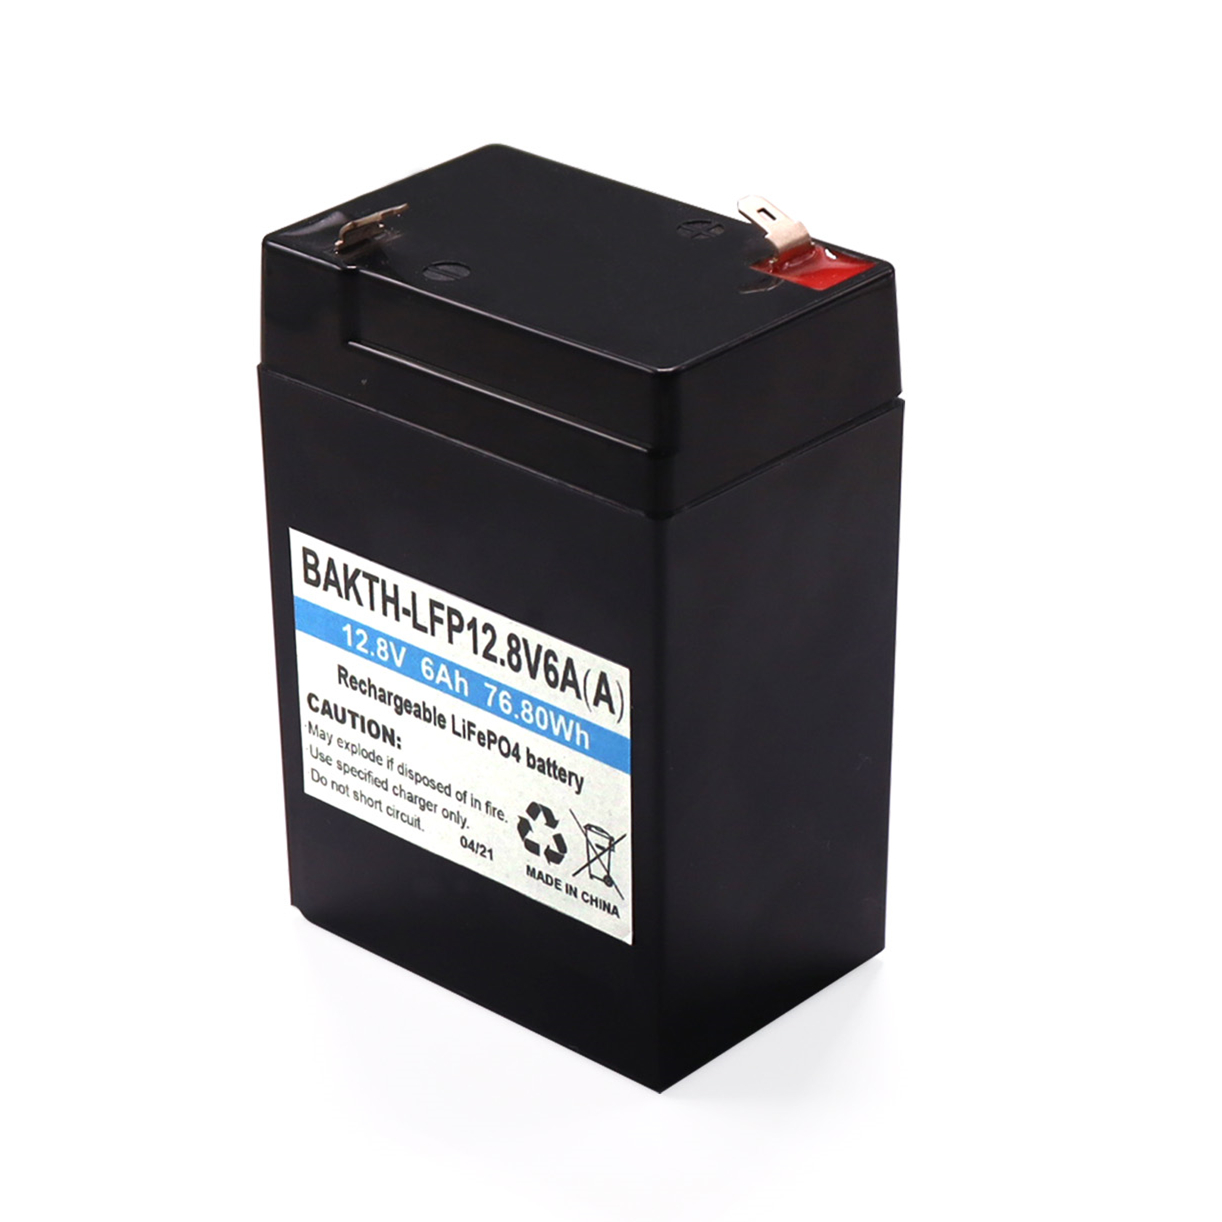 smart 12.8 v LiFePO4 battery cell for electric cars